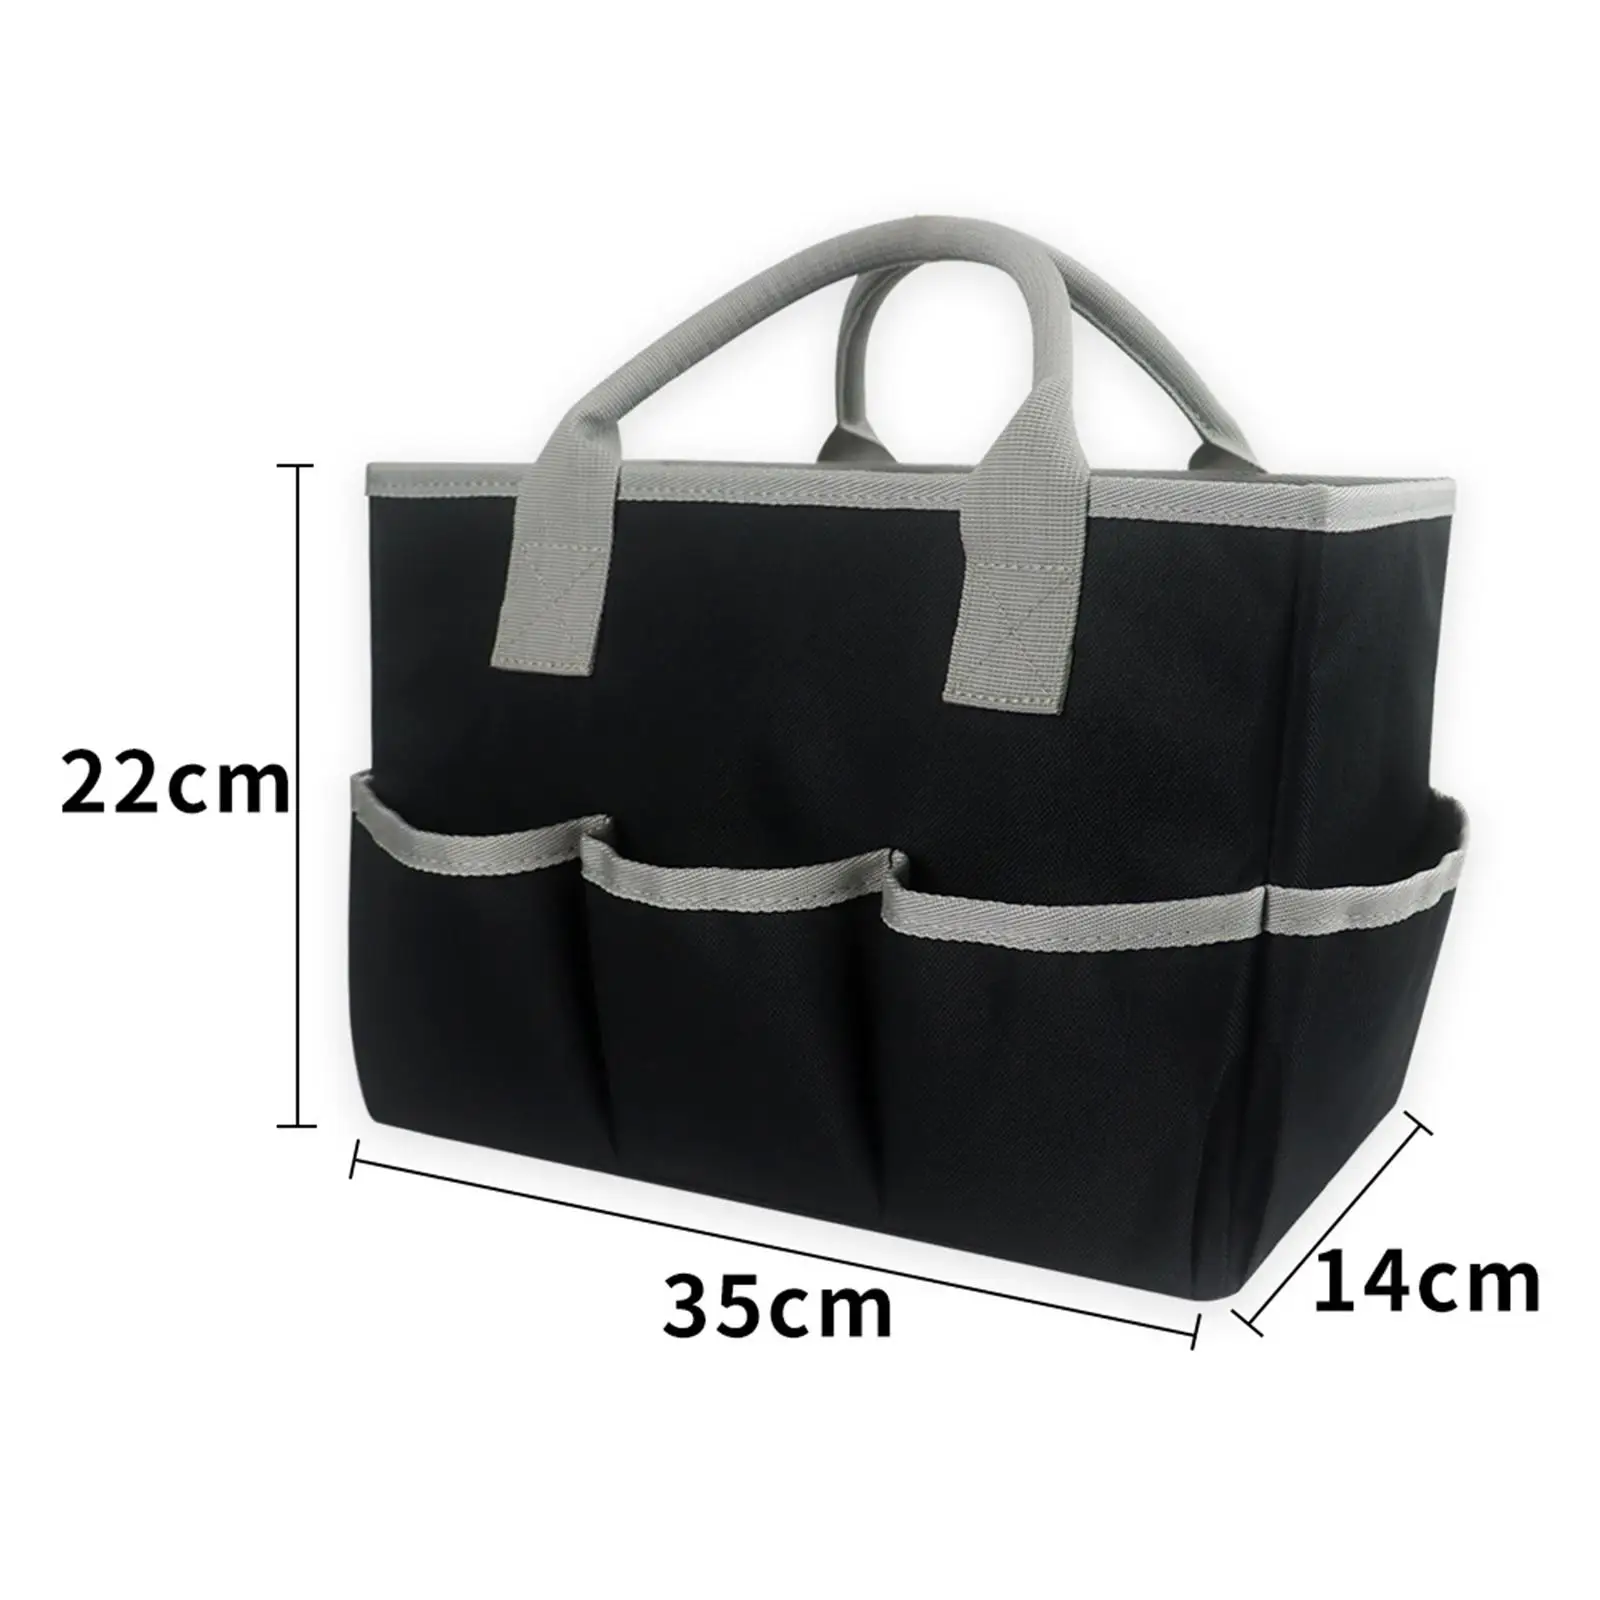 Craft Storage Tote Bag Multi Functional Scrapbook Carrying Case Oxford Fabric Portable Storage Bag for Office Daily Use Travel